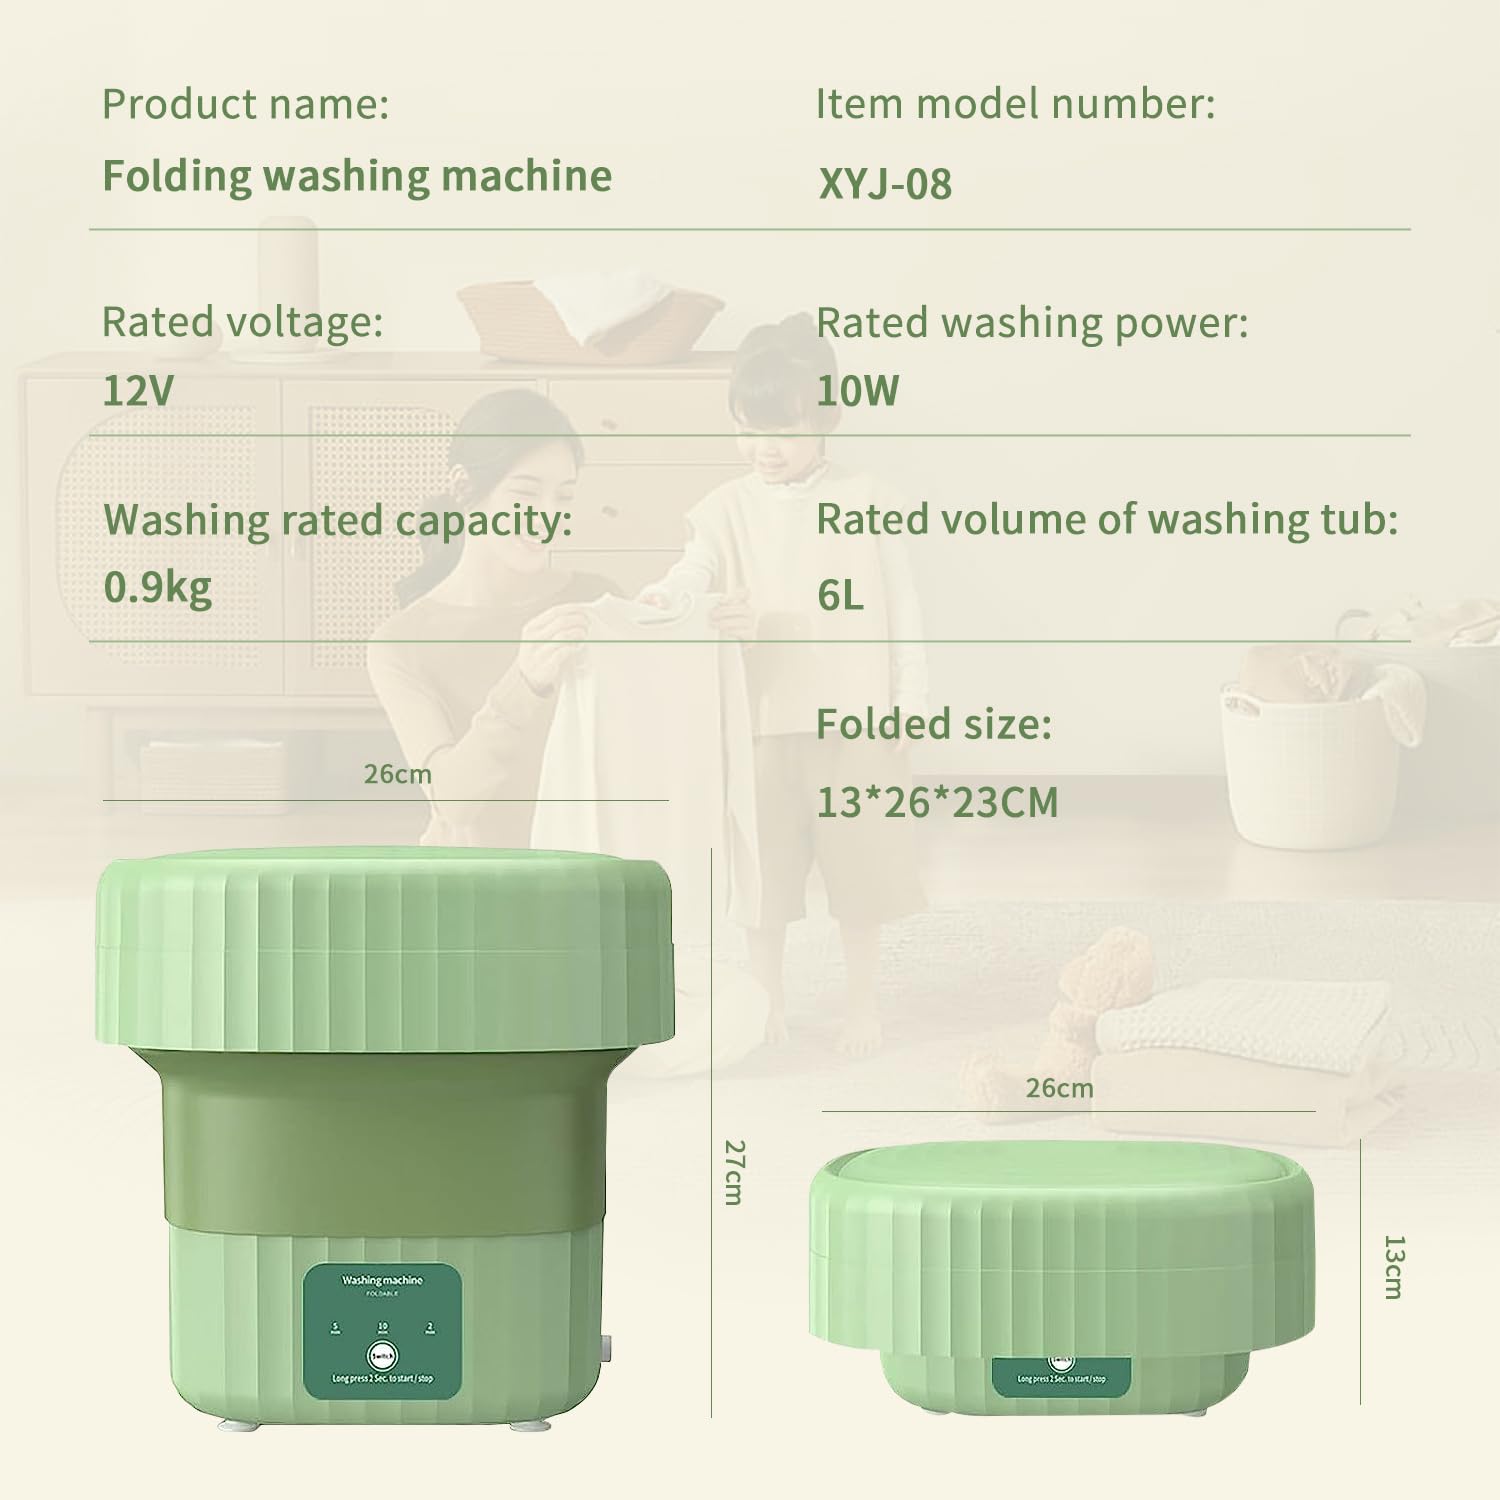 Portable Washing Machine，Foldable Mini Washing Machine - Washing Machine for Baby Clothes, Underwear or Small Items,Camping, RV, Travel, Underwear, Socks and Easy to Carry (ABS-Green)